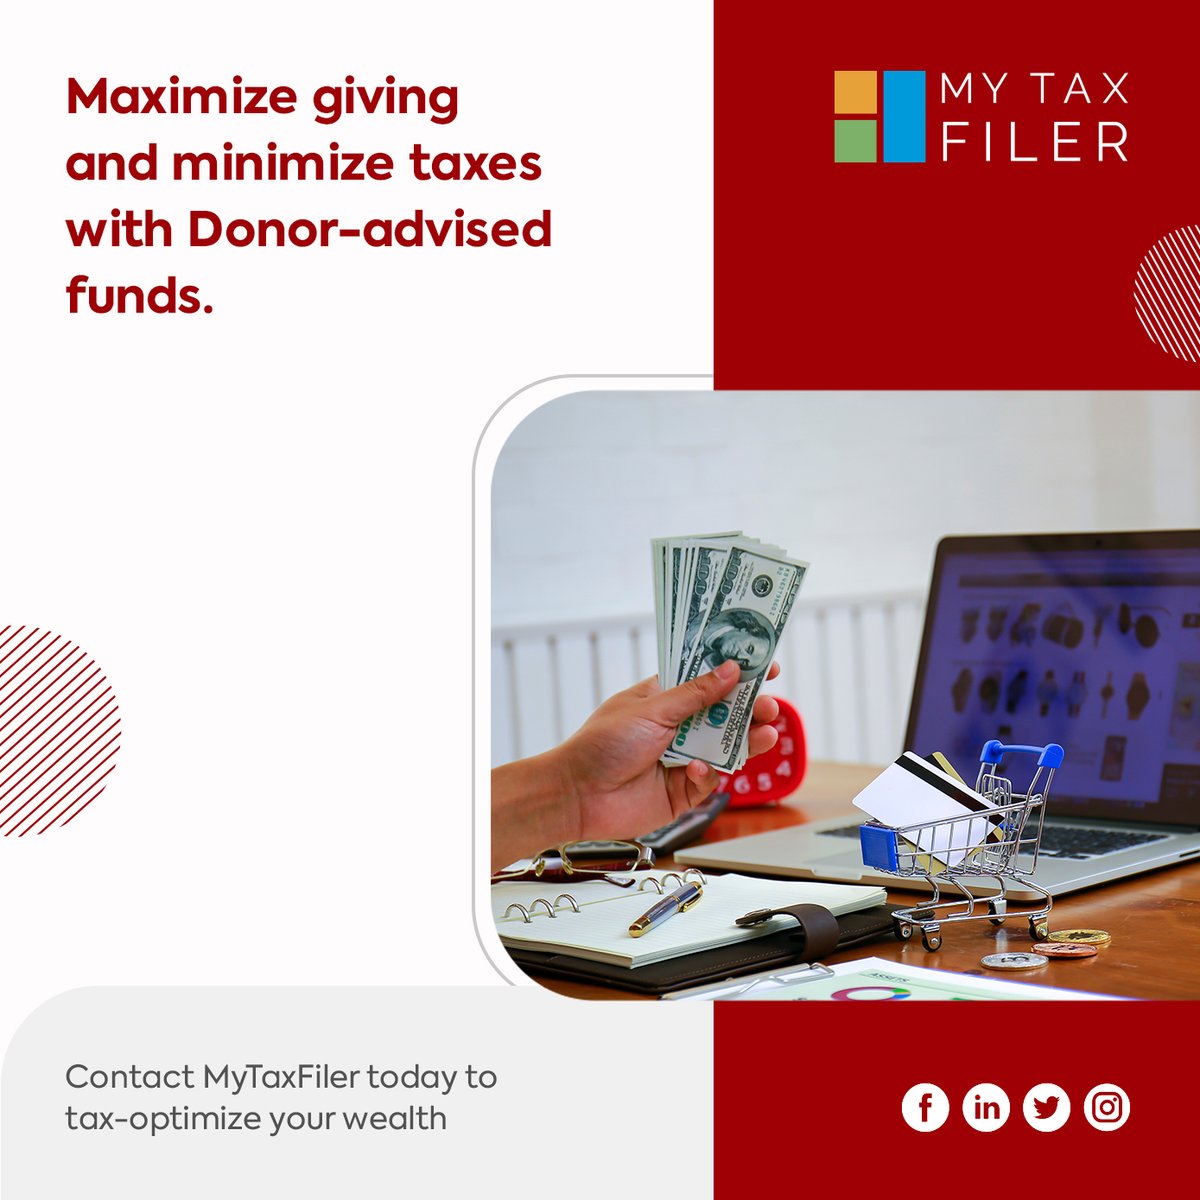 Donor-advised funds (DAFs) offer tax breaks on contributions including cash, securities, and assets like crypto. They defer taxes and exempt gains, streamlining charitable giving. For more tax strategies, email Tax@MyTaxFiler.com. #taxstrategies #DAFs #taxbreaks